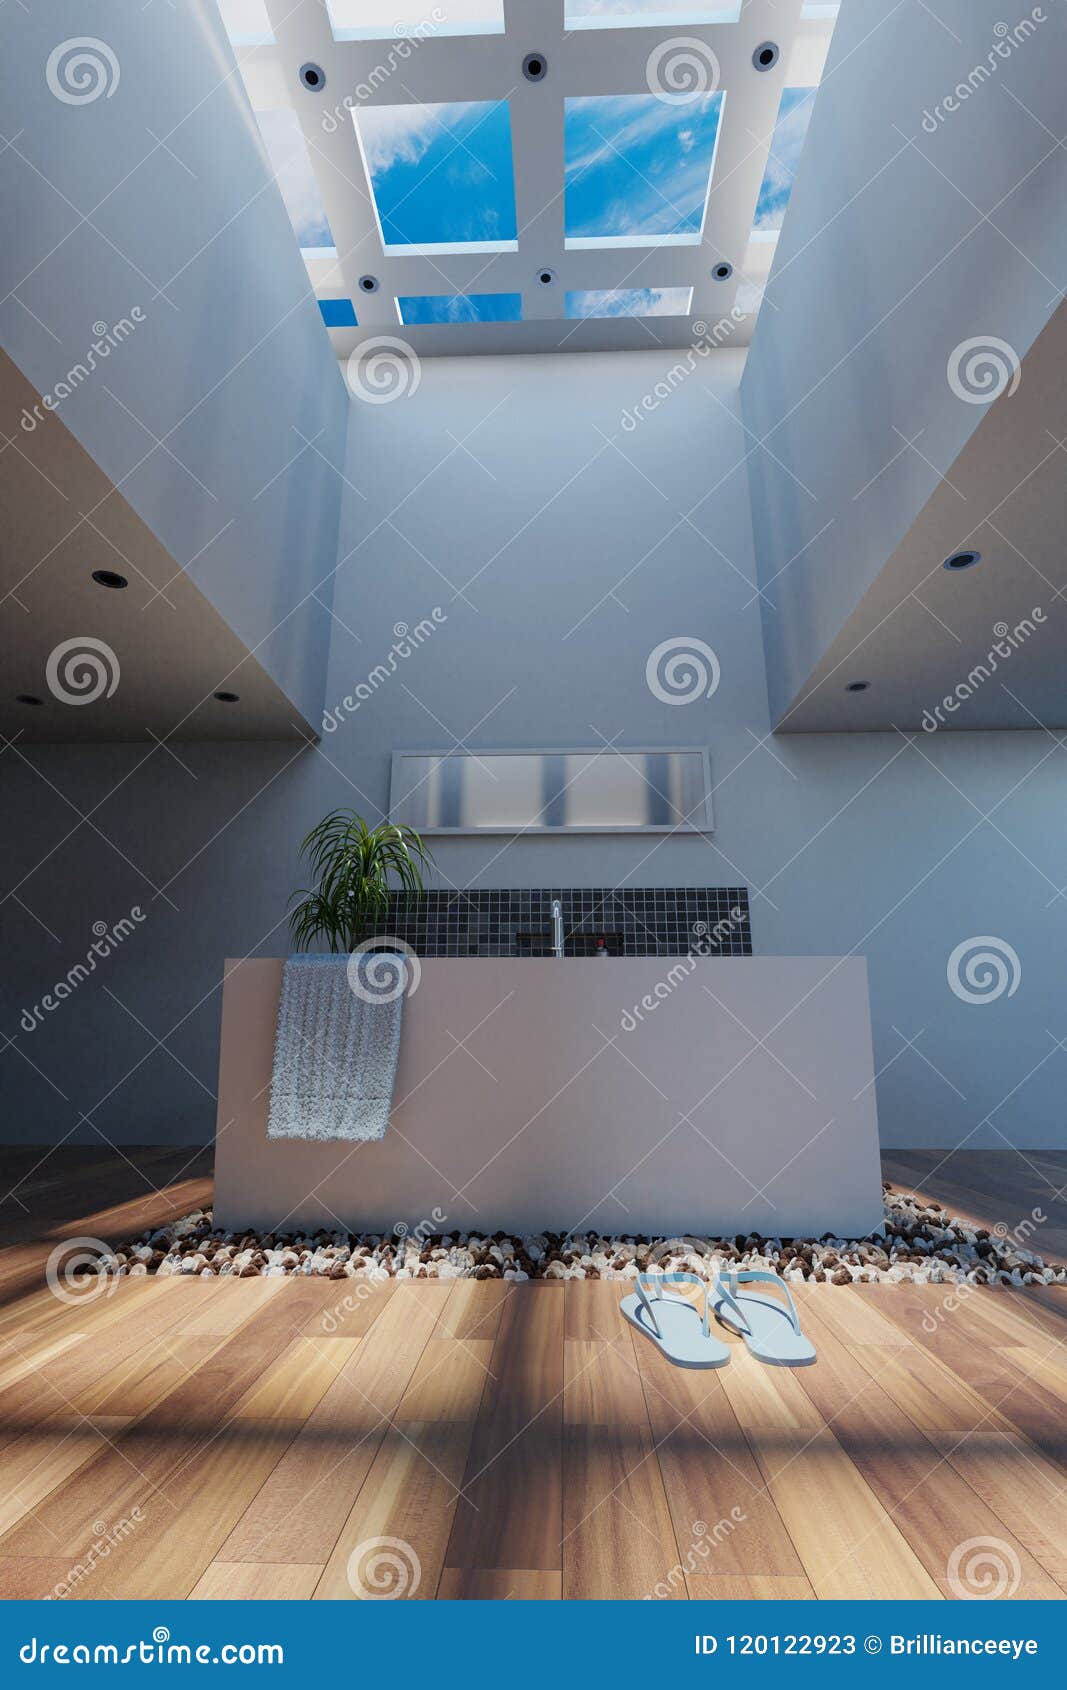 3d Rendering Of White Bathroom With Glass Roof And Laminate Floor